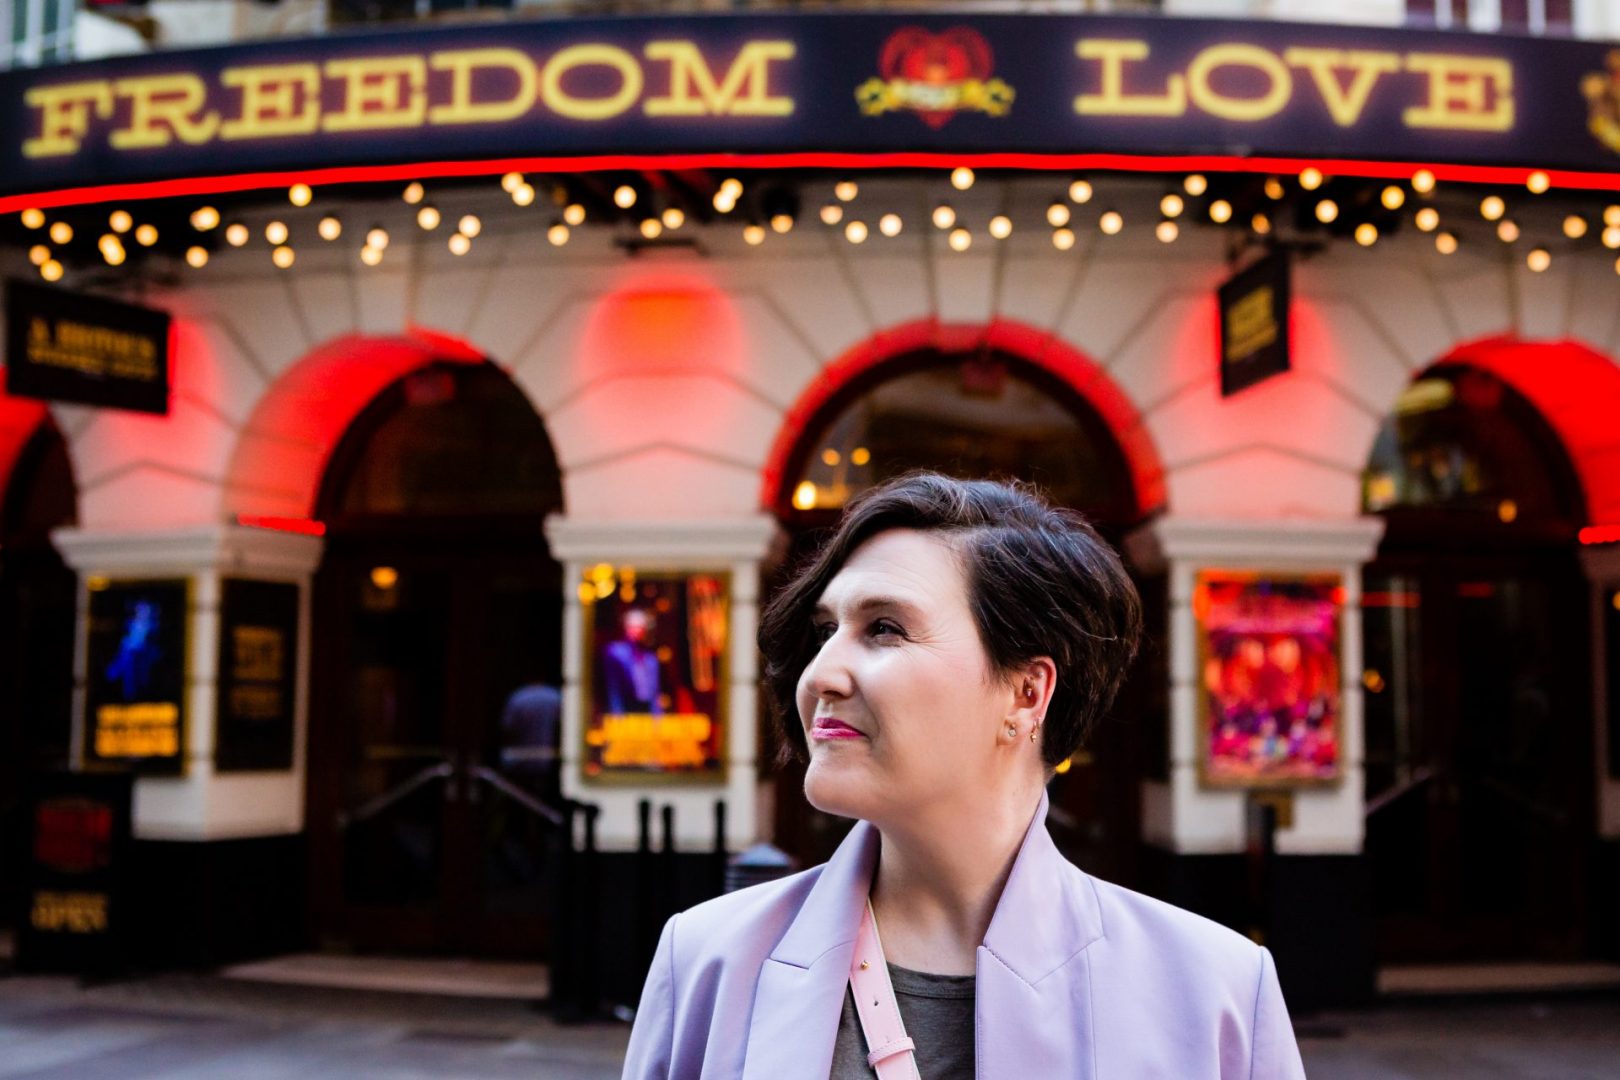 London wedding celebrant Nat Raybould in front of the Moulin Rouge theatre in London